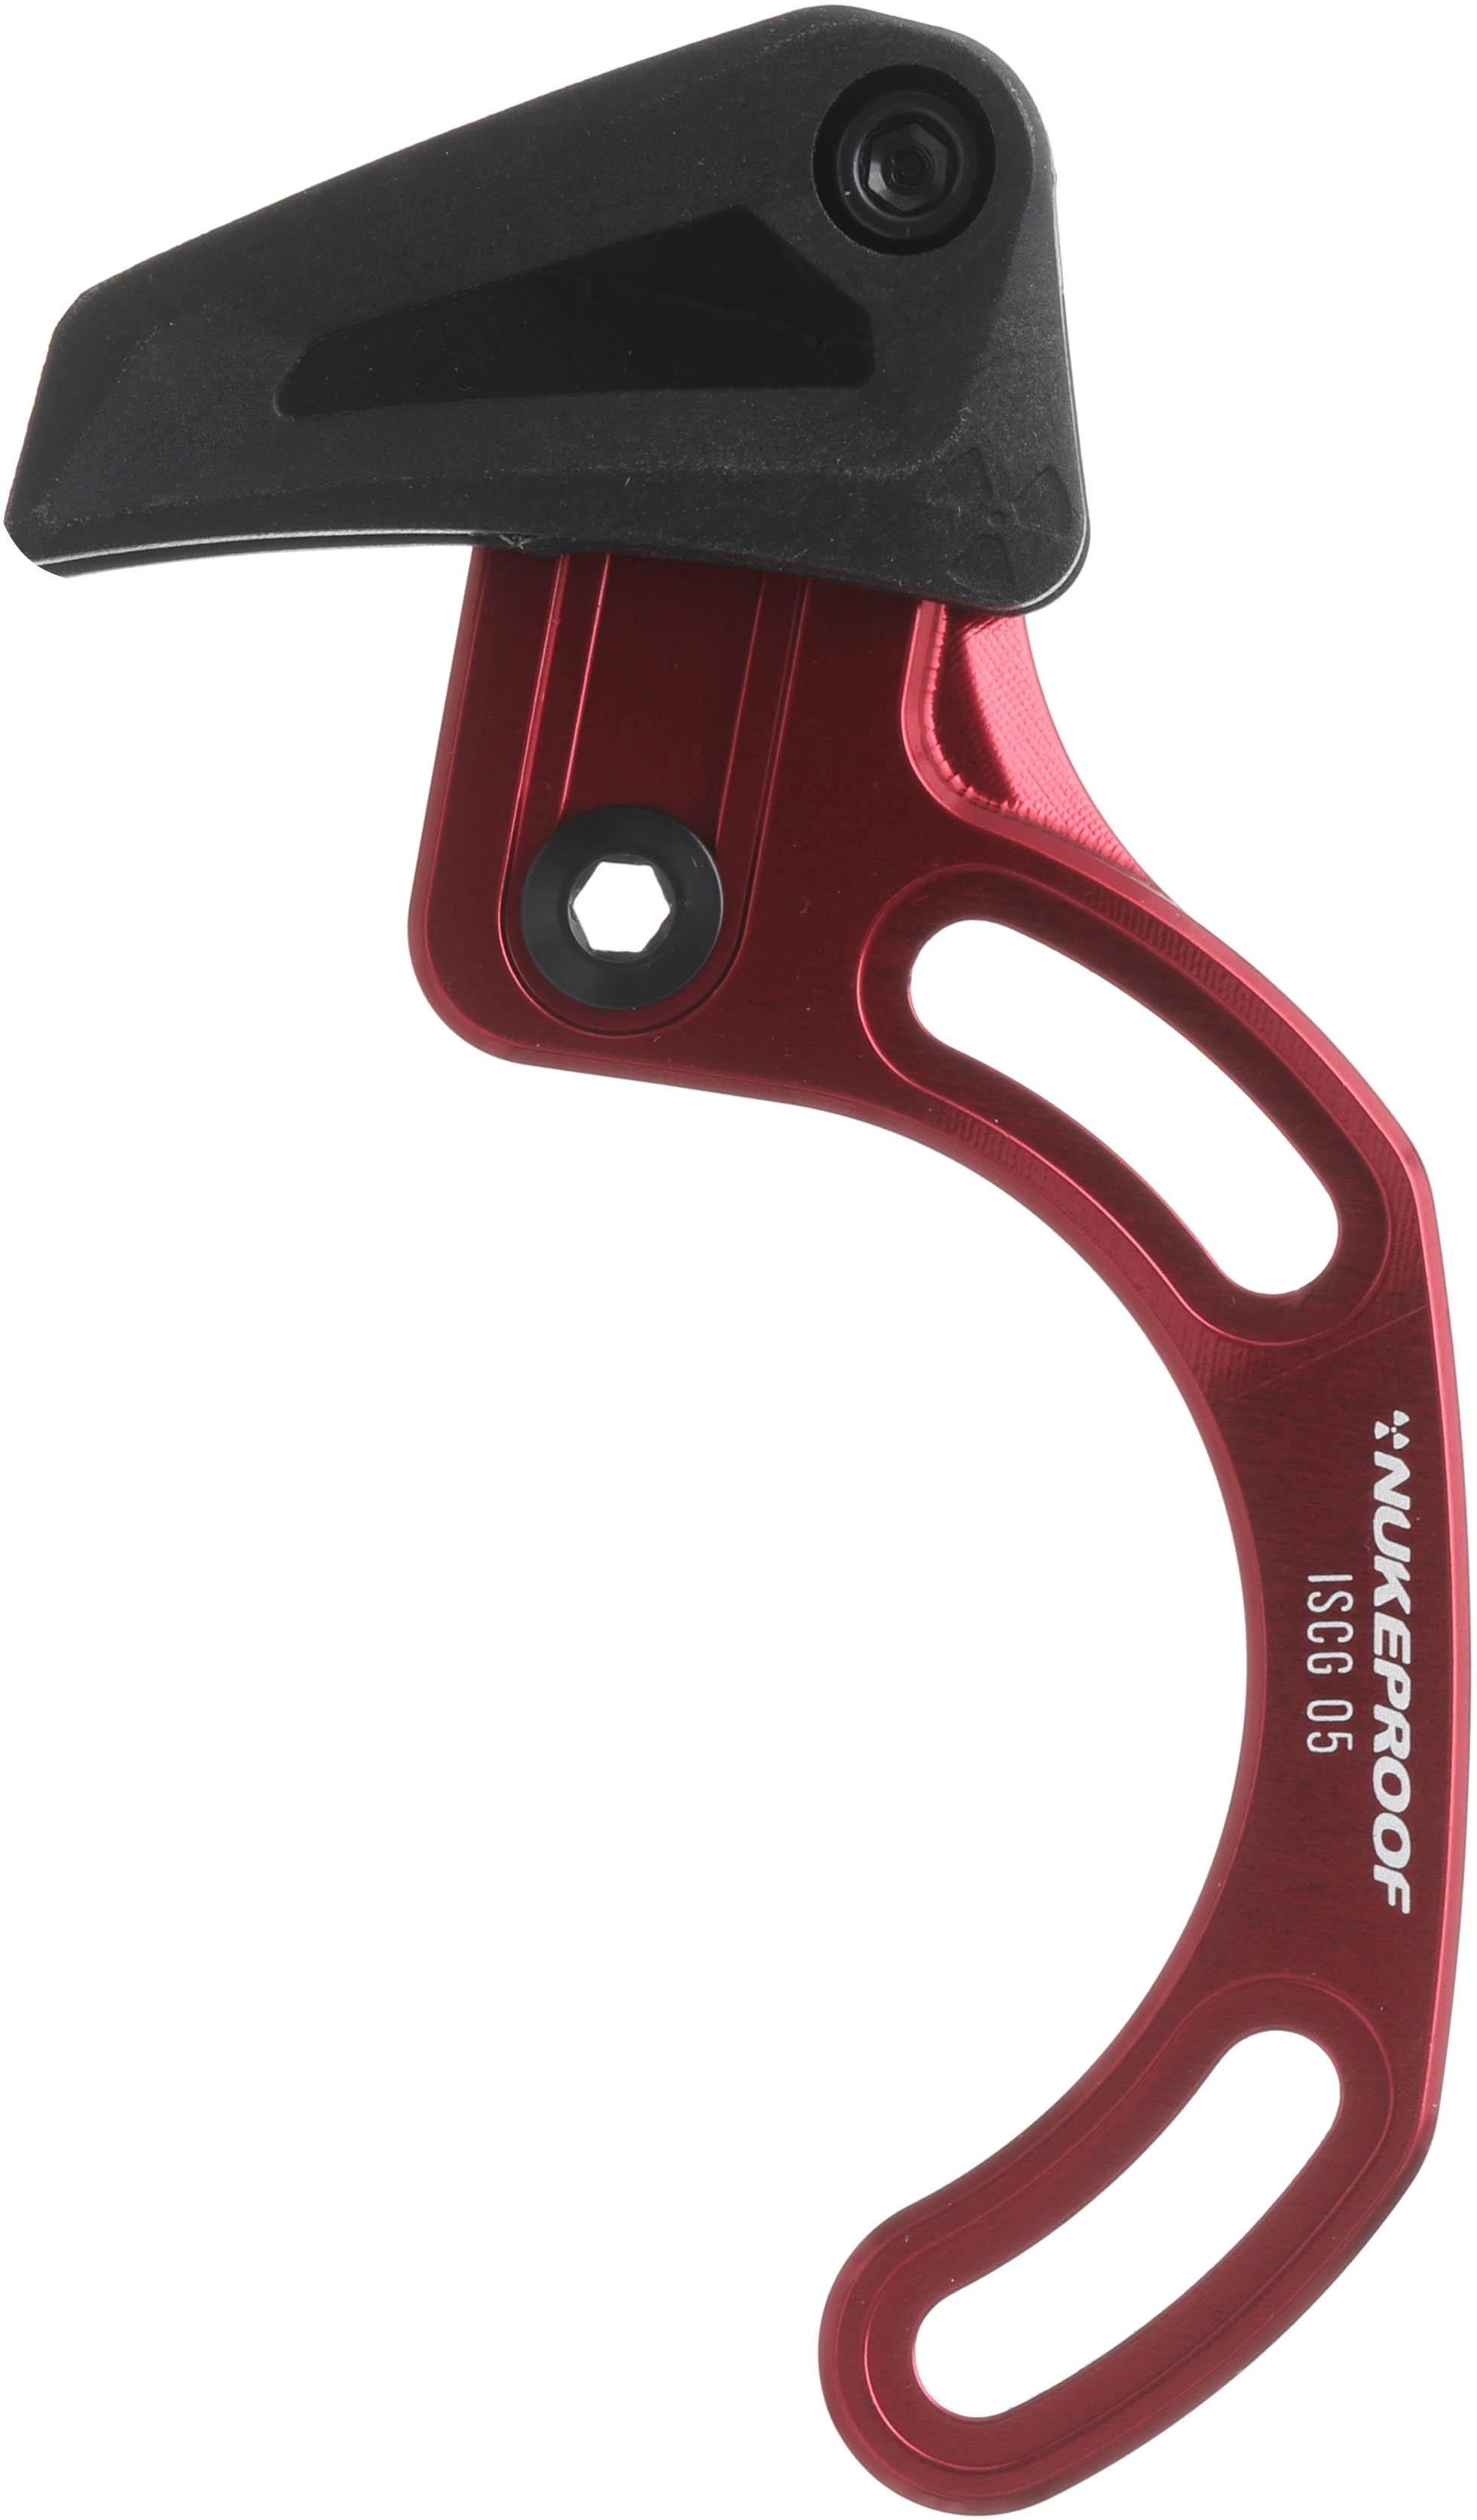 Nukeproof Chain Guide Iscg 05 Top Guide - Red -black